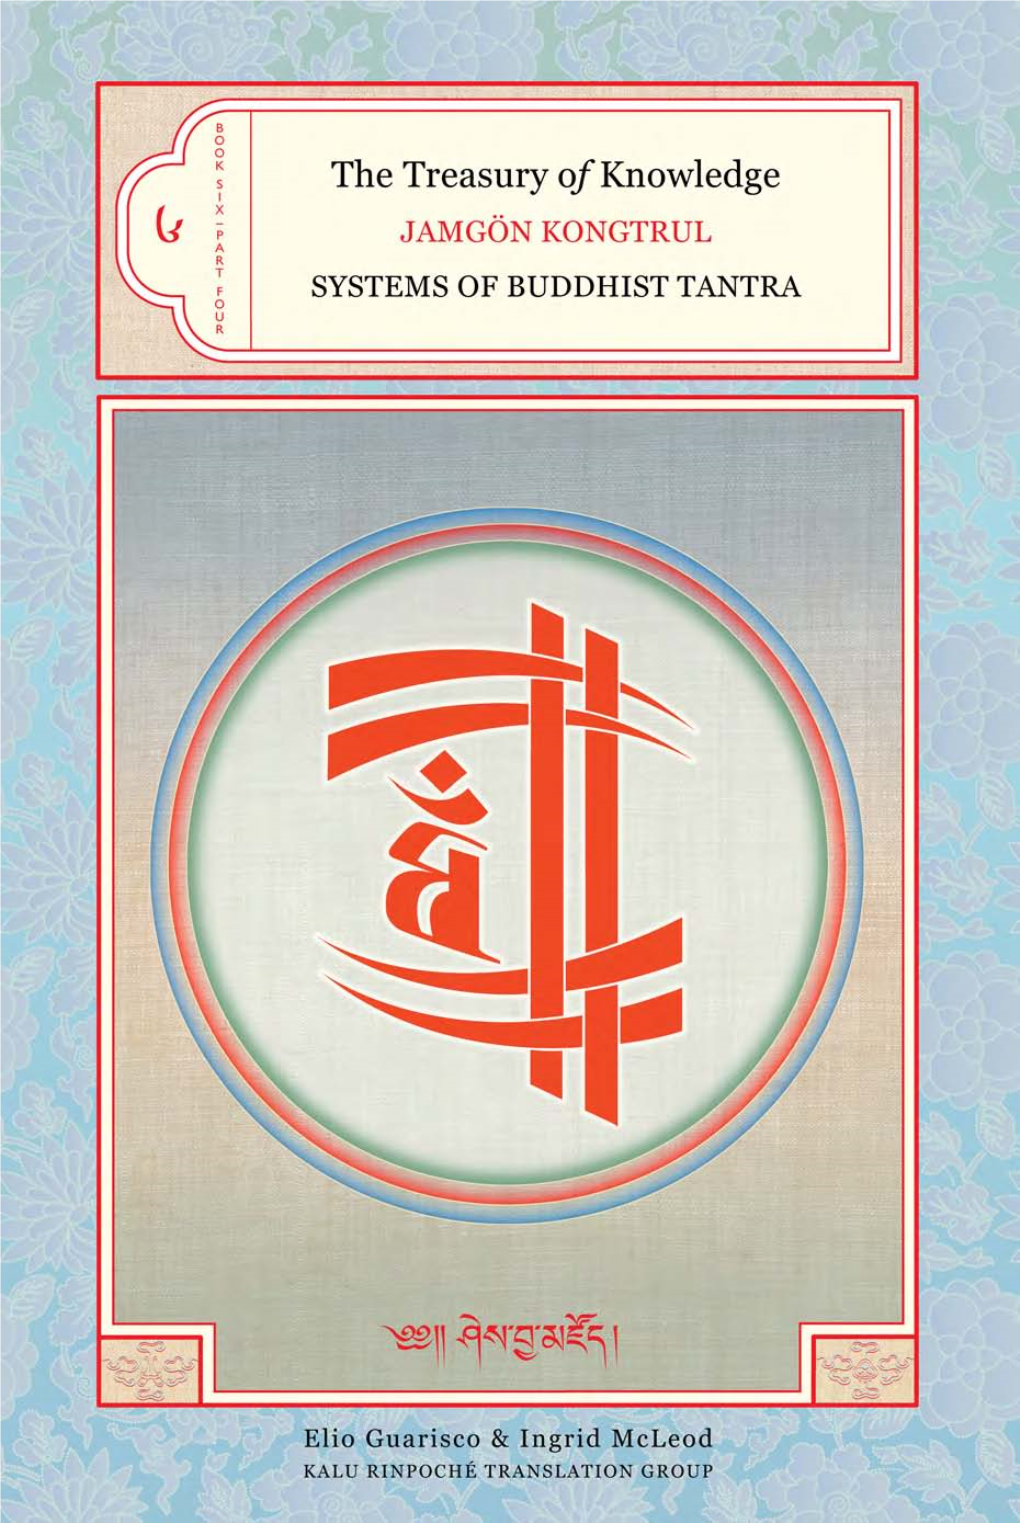 The Treasury of Knowledge, Book 6, Part 4: Systems of Buddhist Tantra